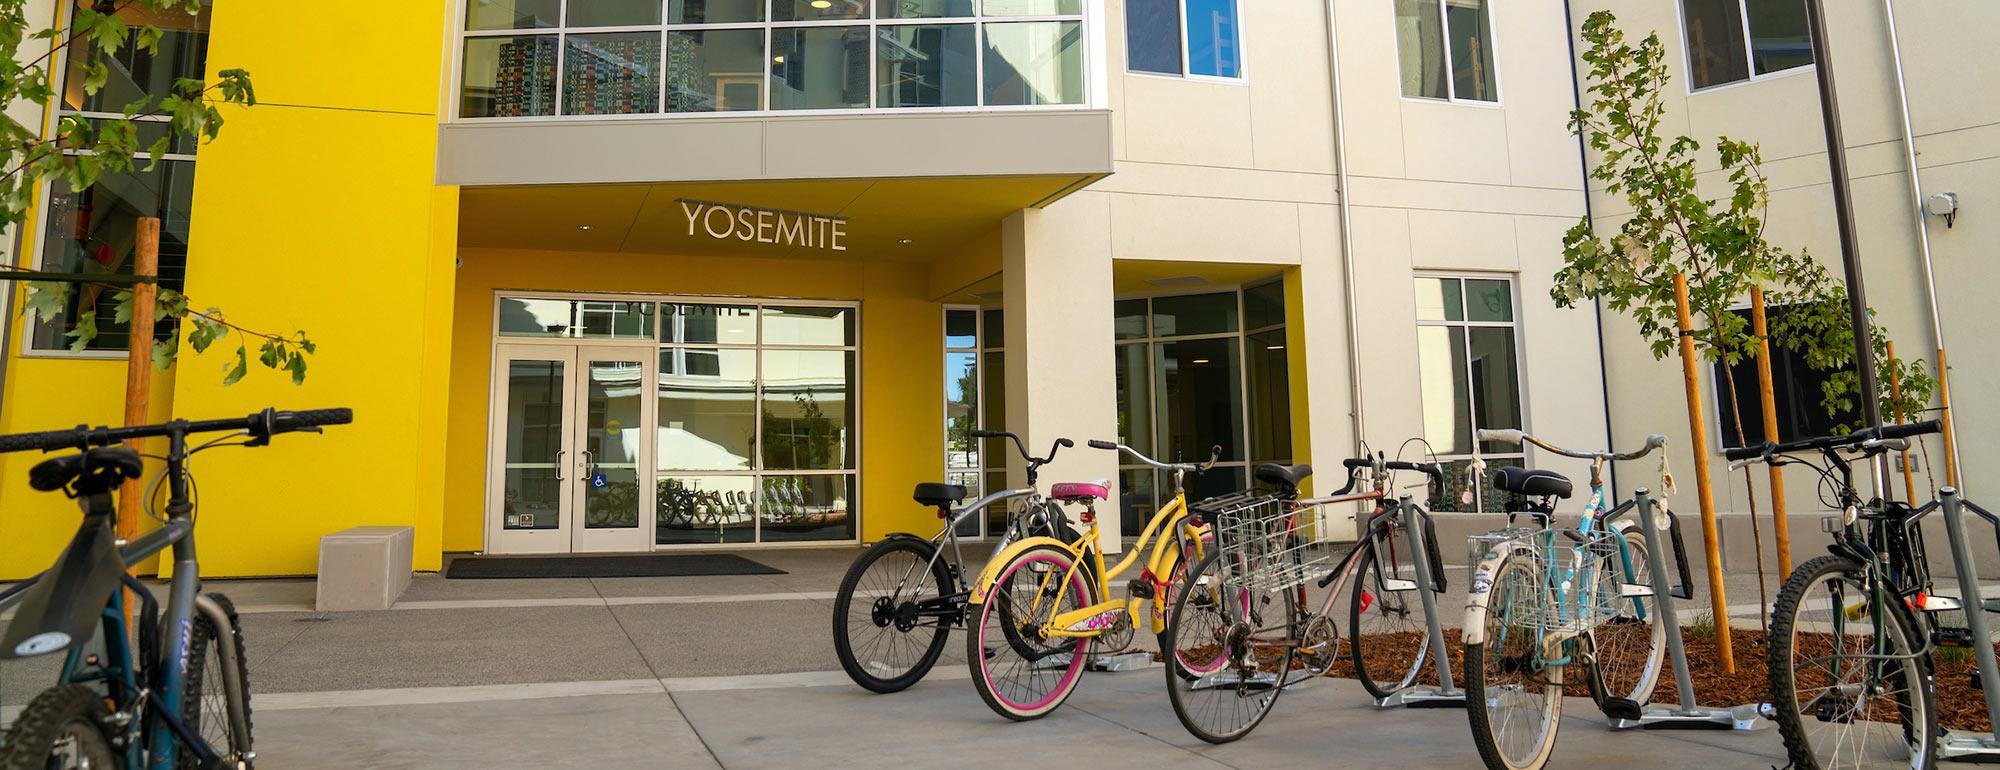 A view of a bike parking area just outside the entrance to Yosemite hall 